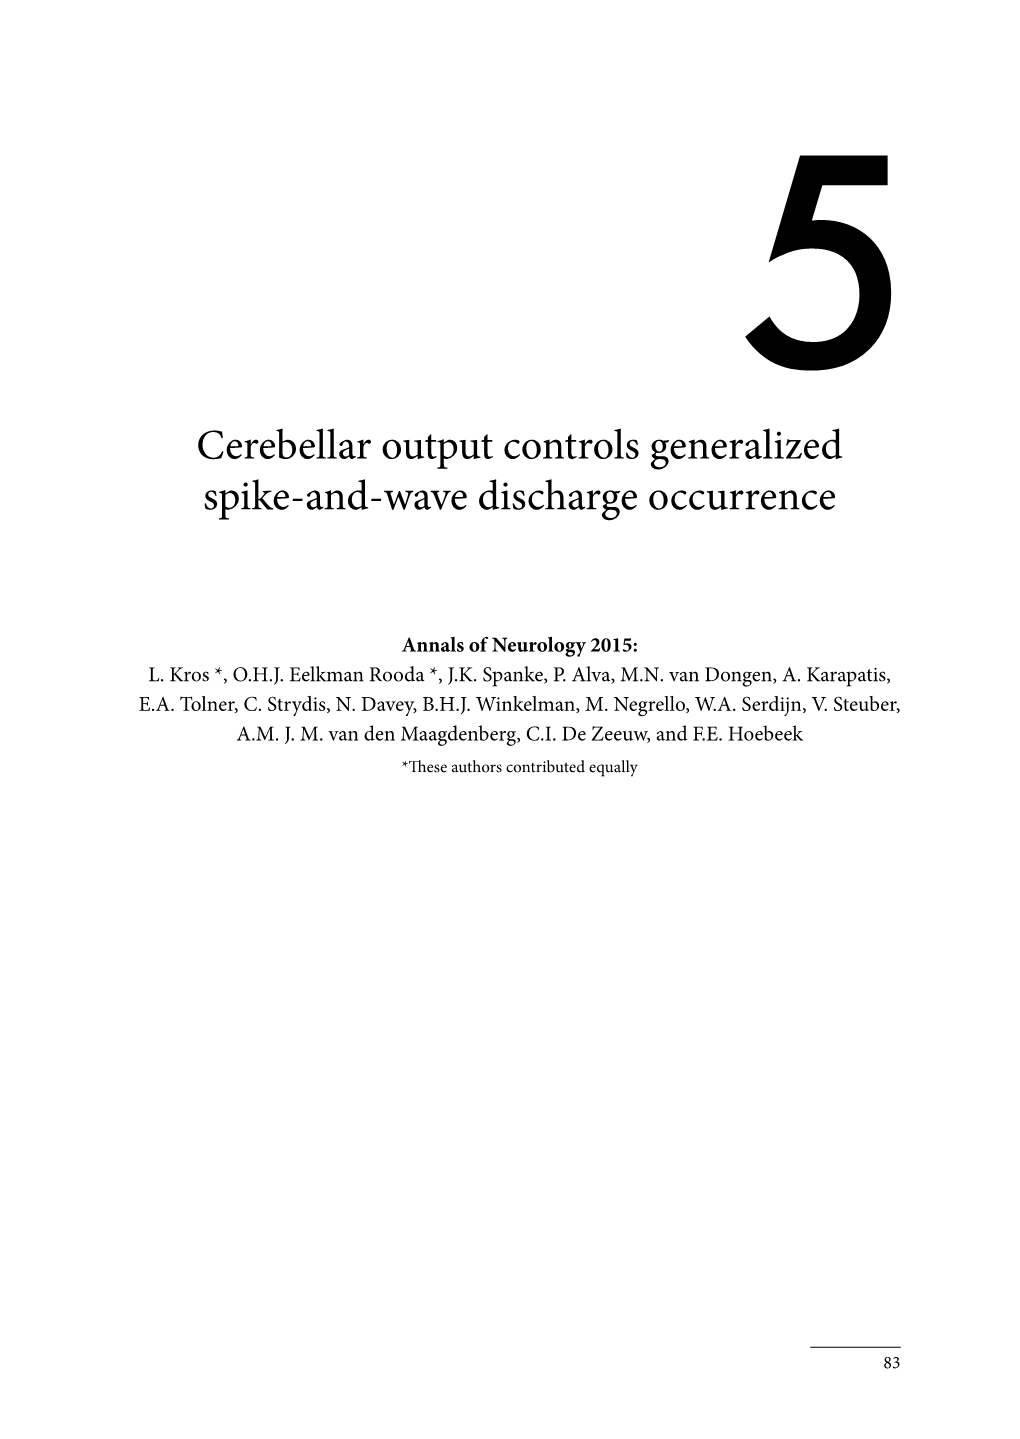 Cerebellar Output Controls Generalized Spike-And-Wave Discharge Occurrence